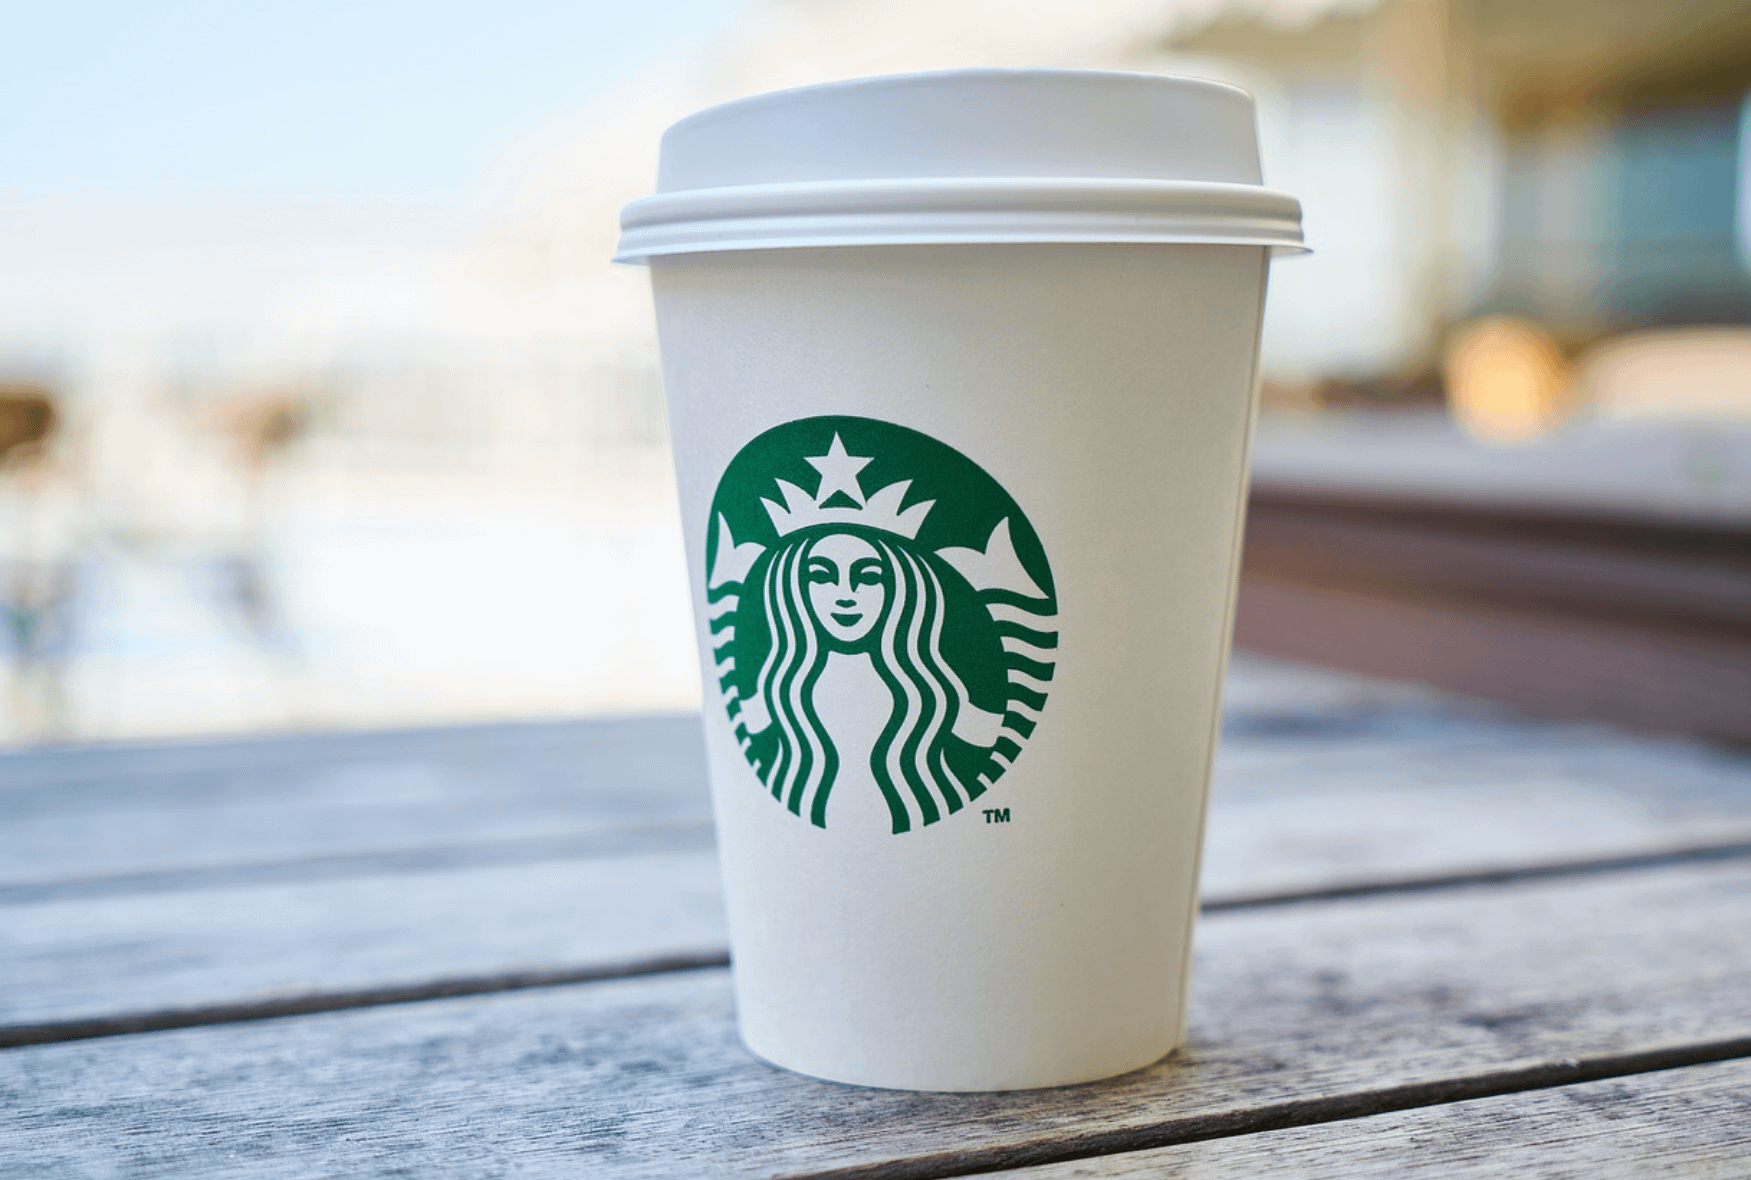 ‘Starbucks has a problem’: Labor experts evaluate increasingly messy union fight – Yahoo Finance – Rachel Demarest Gold interviewed